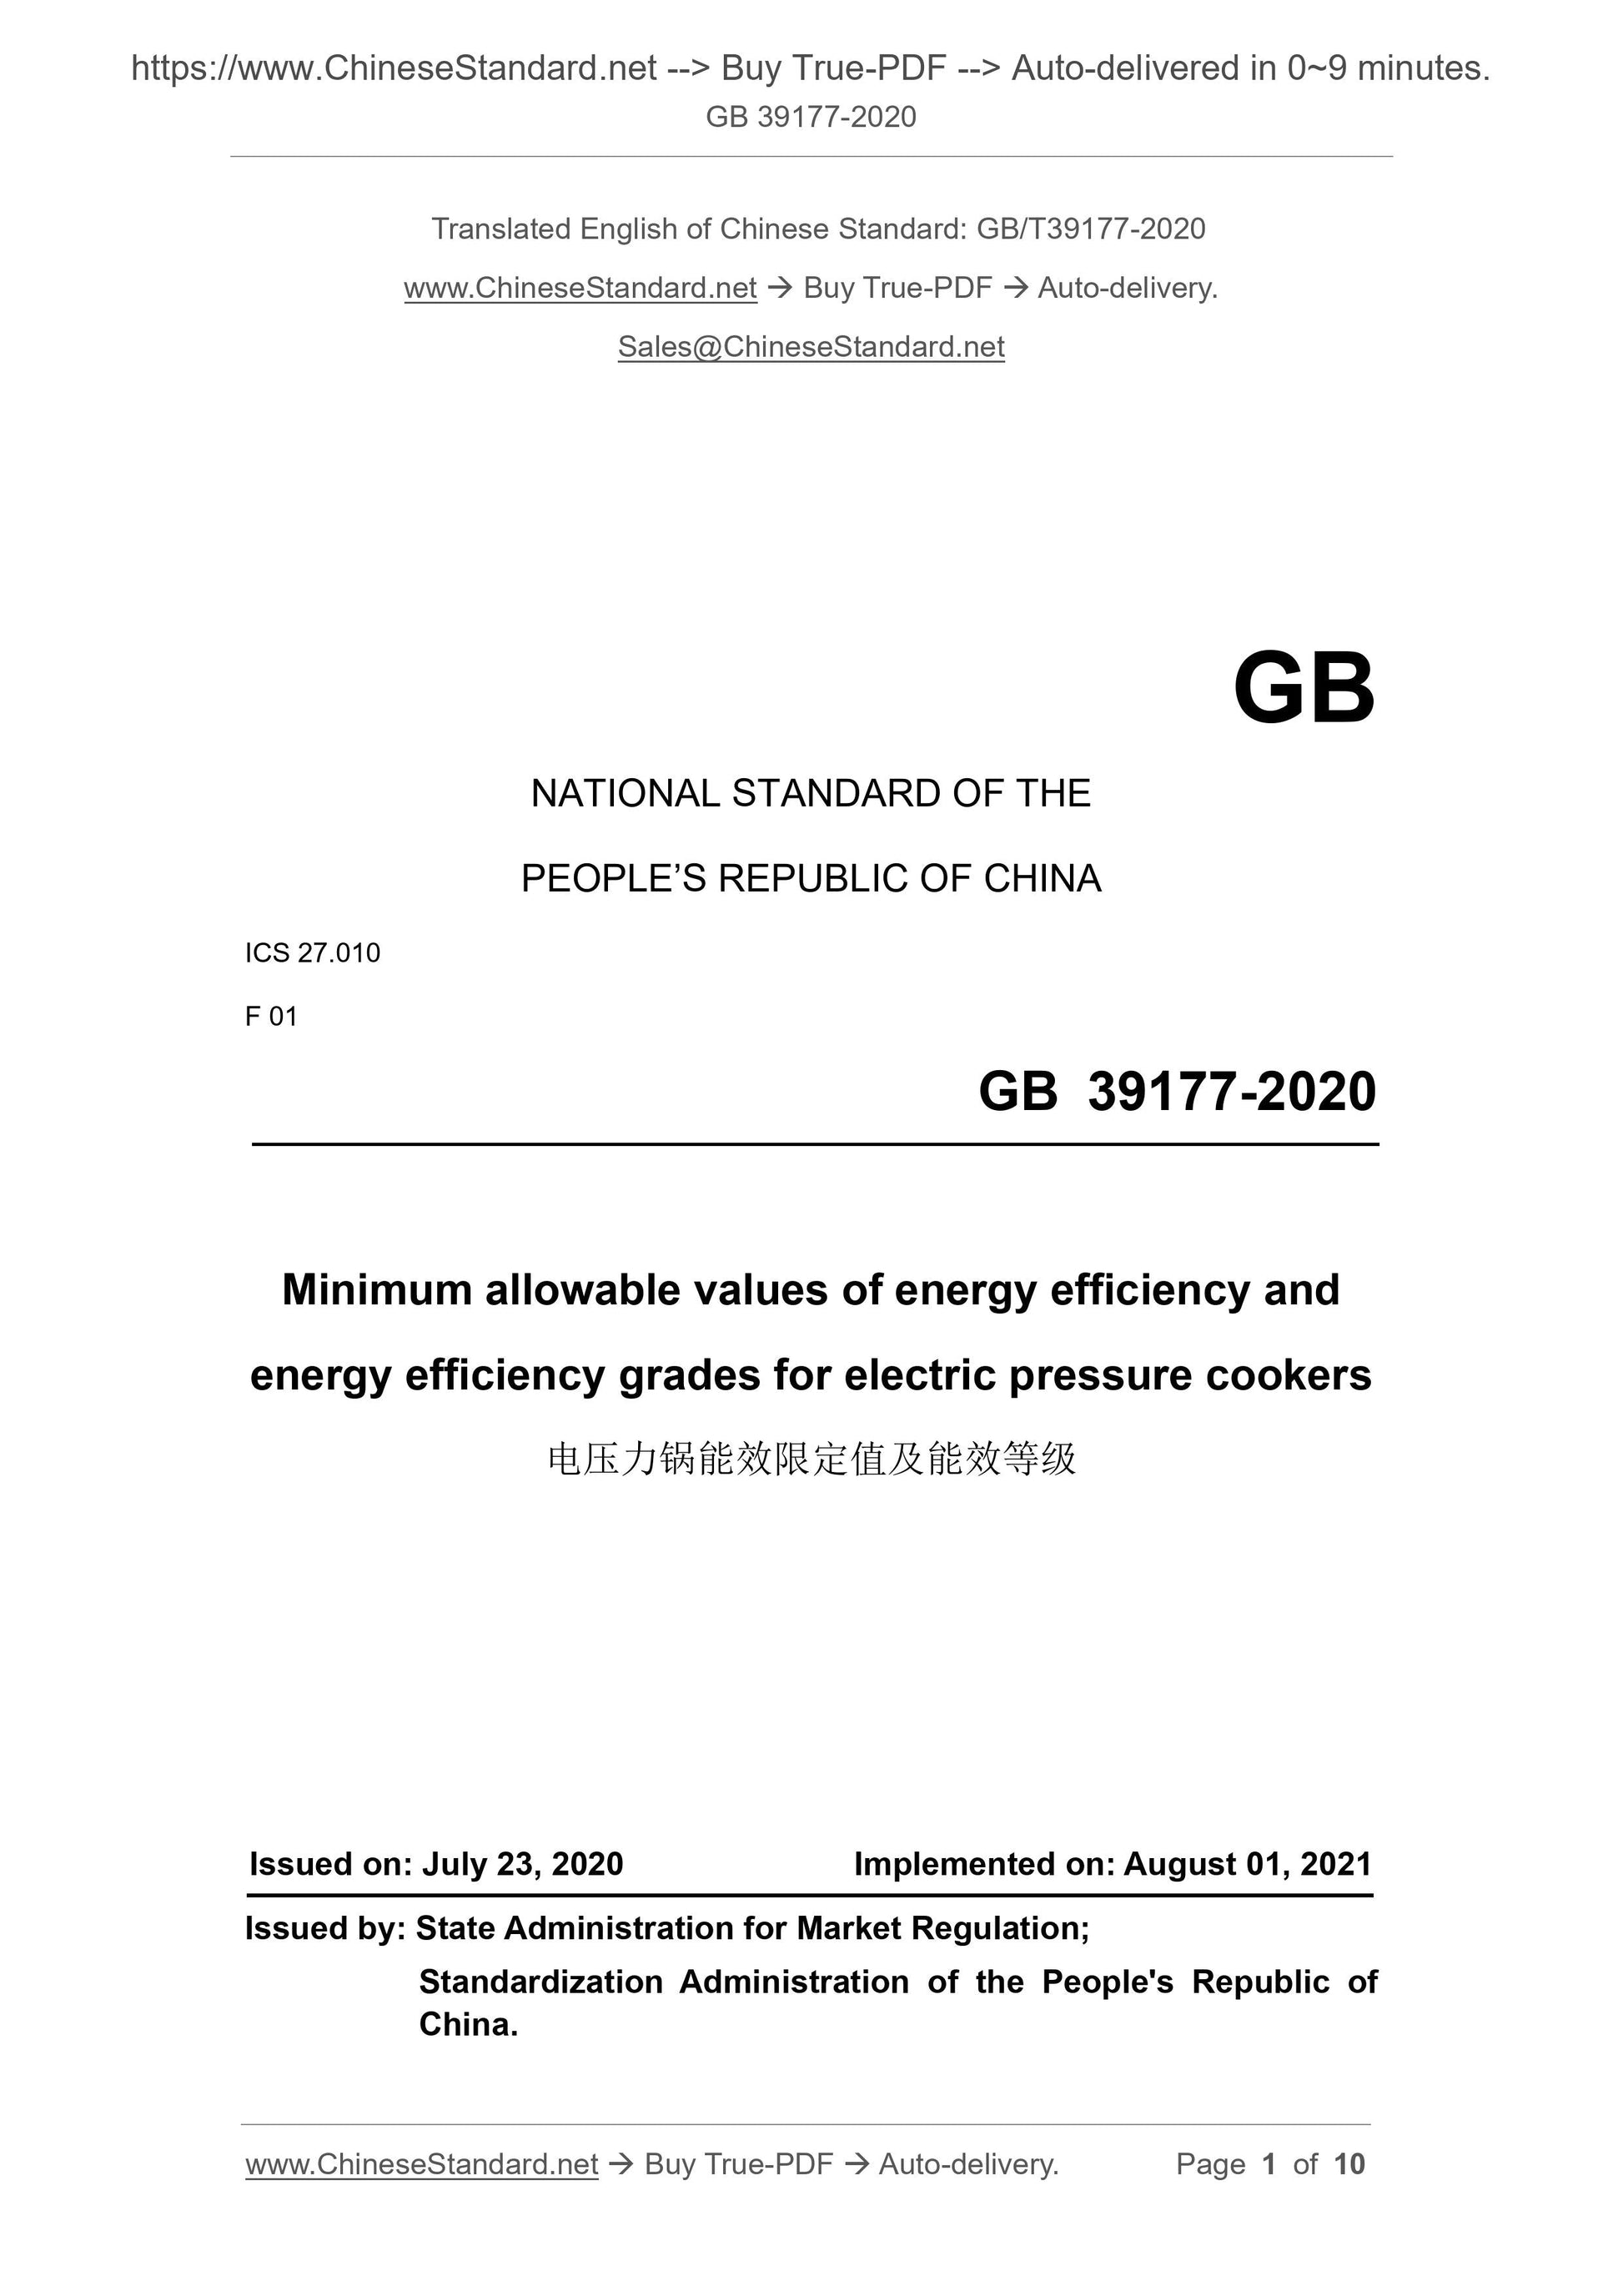 GB 39177-2020 Page 1